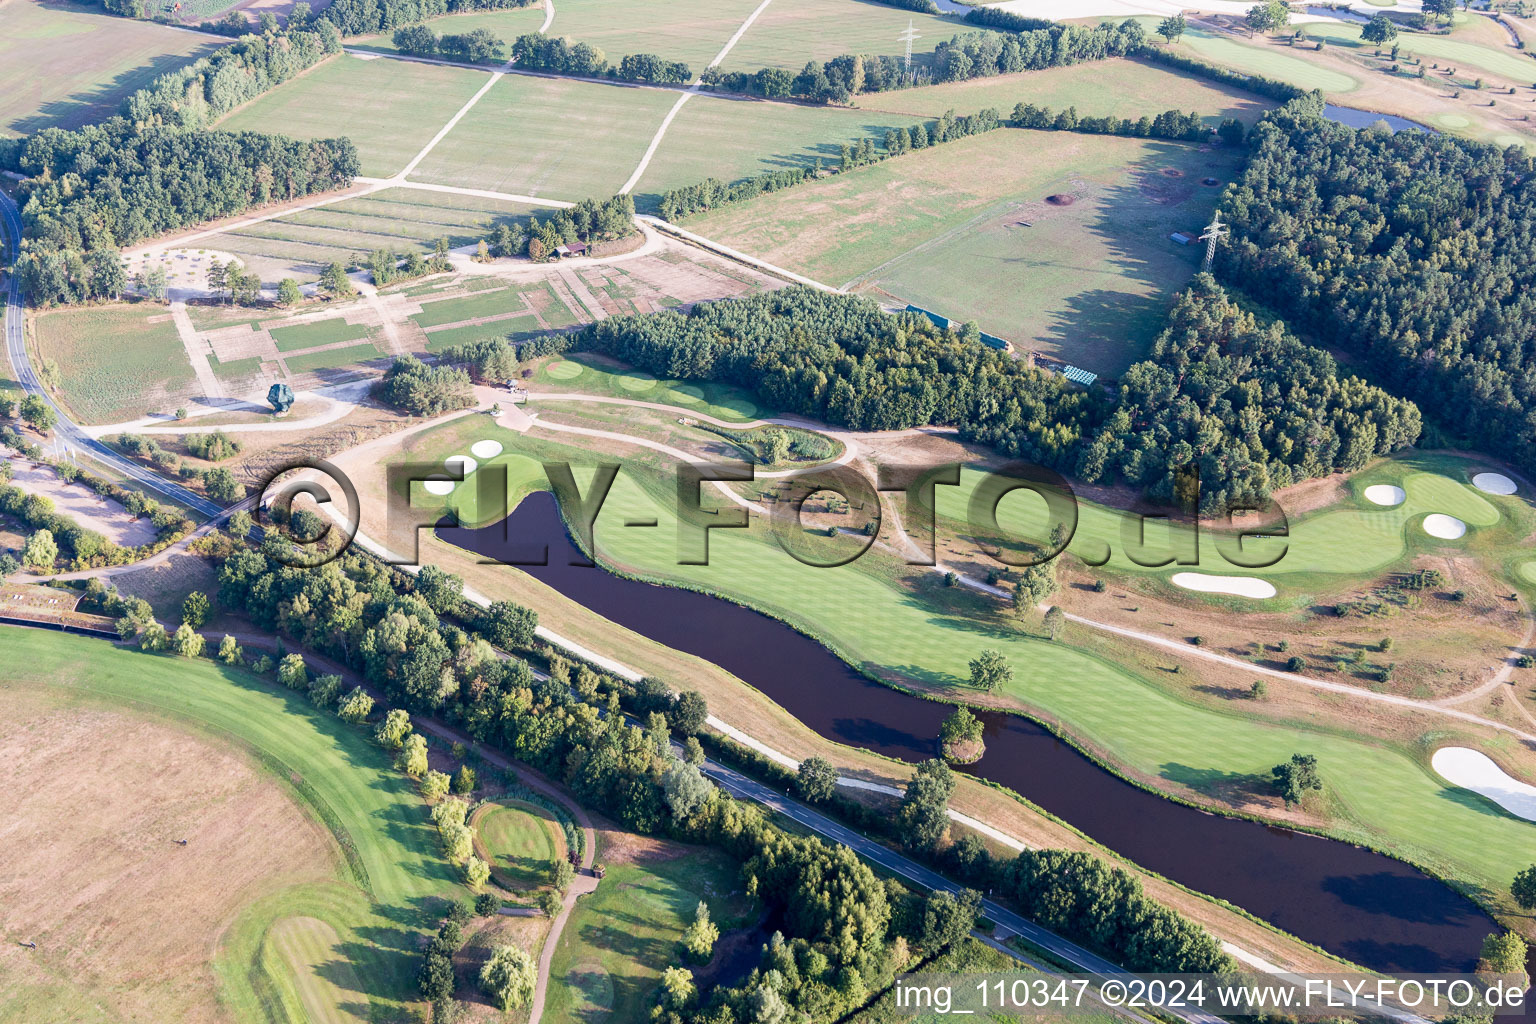 Oblique view of Grounds of the Golf course at Green Eagle Golf Courses in Winsen (Luhe) in the state Lower Saxony, Germany